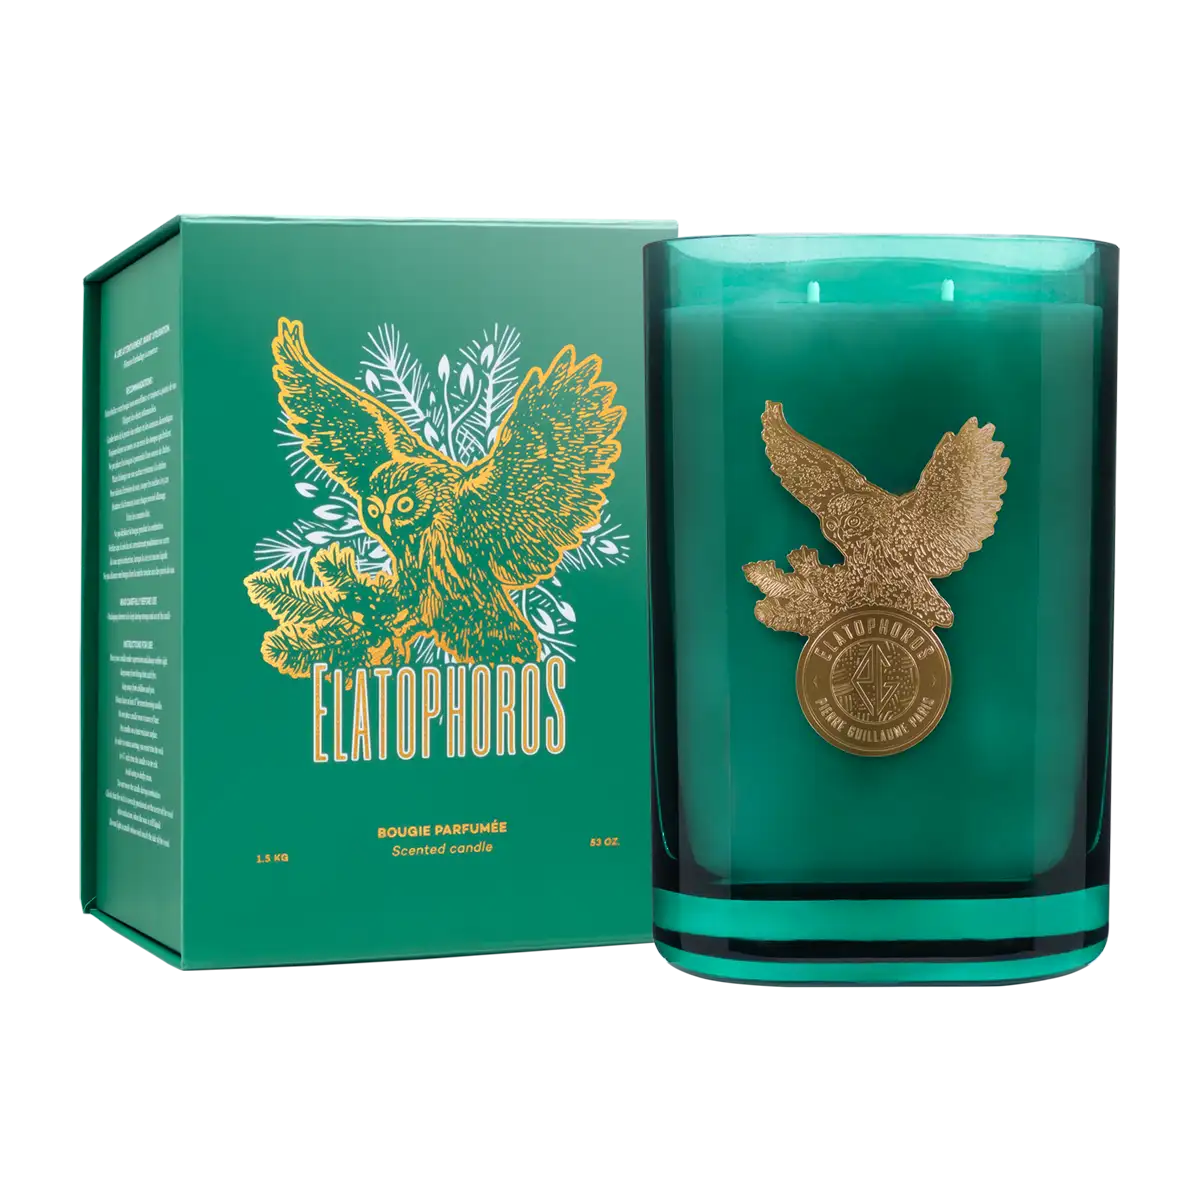 ELATOPHOROS Scented Candle 1,5kg (2023 Edition) - Available from 10th of December